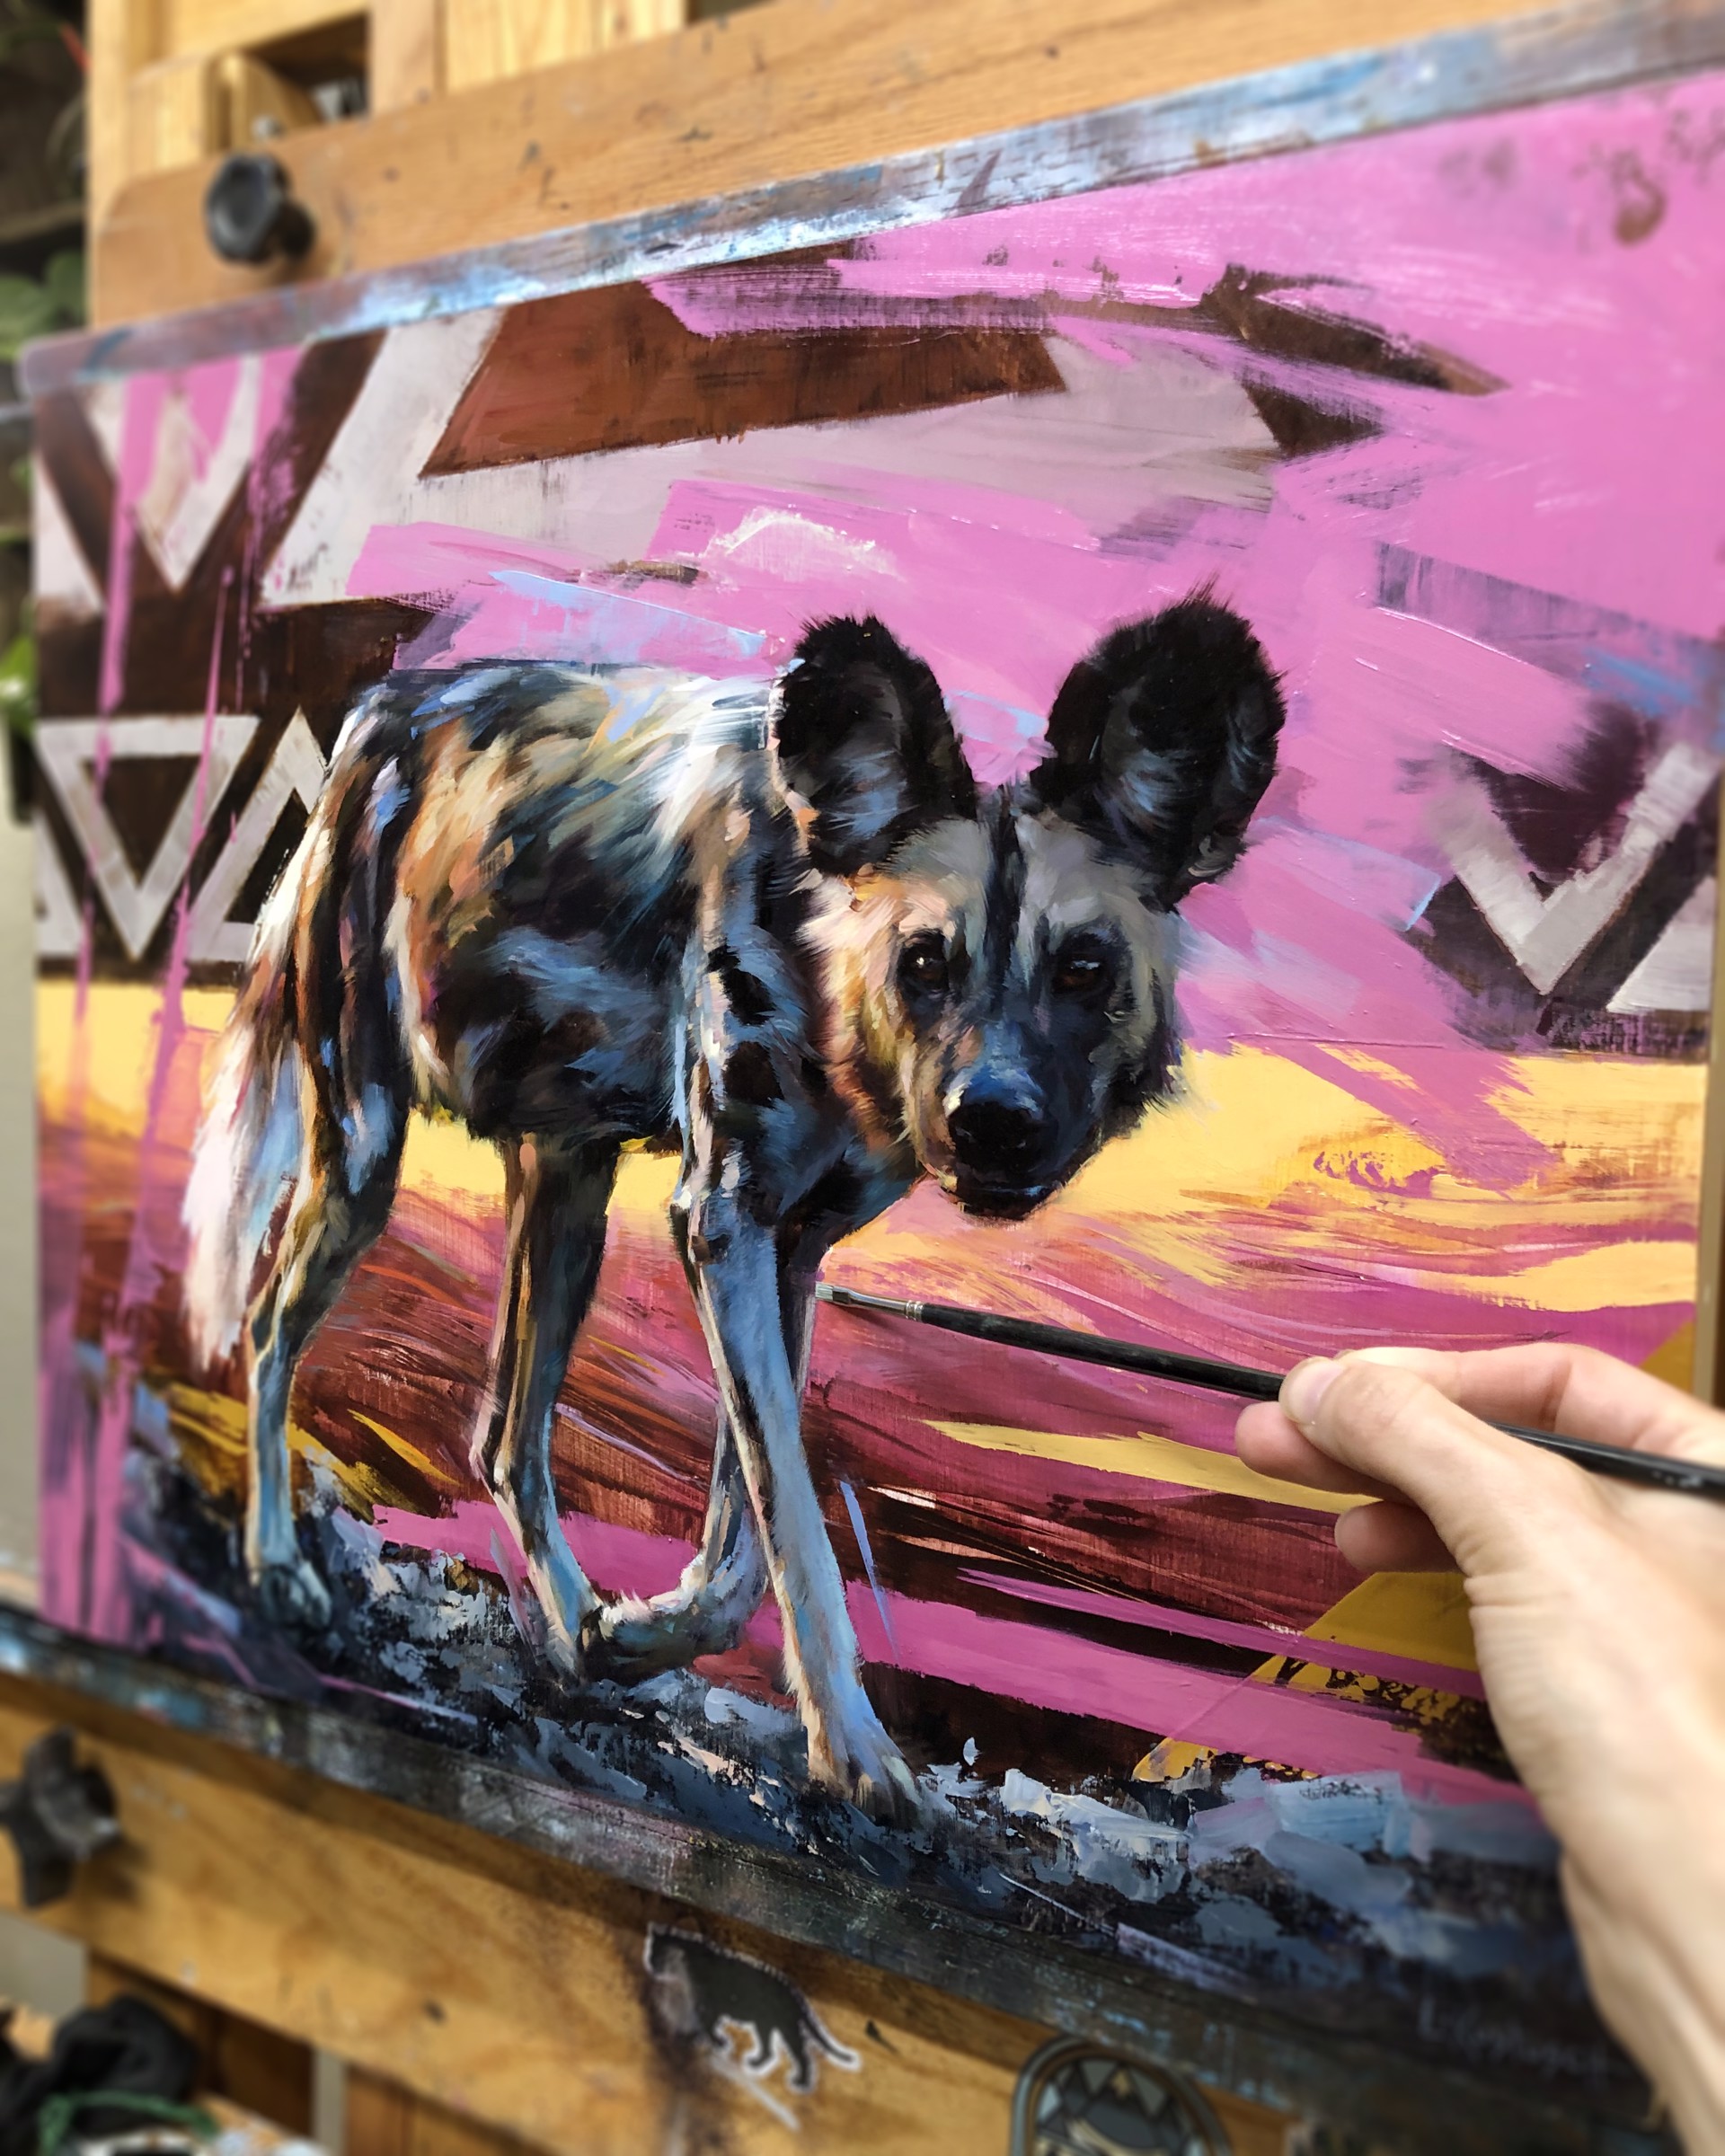 The Painted Dog by Lindsey Kustusch